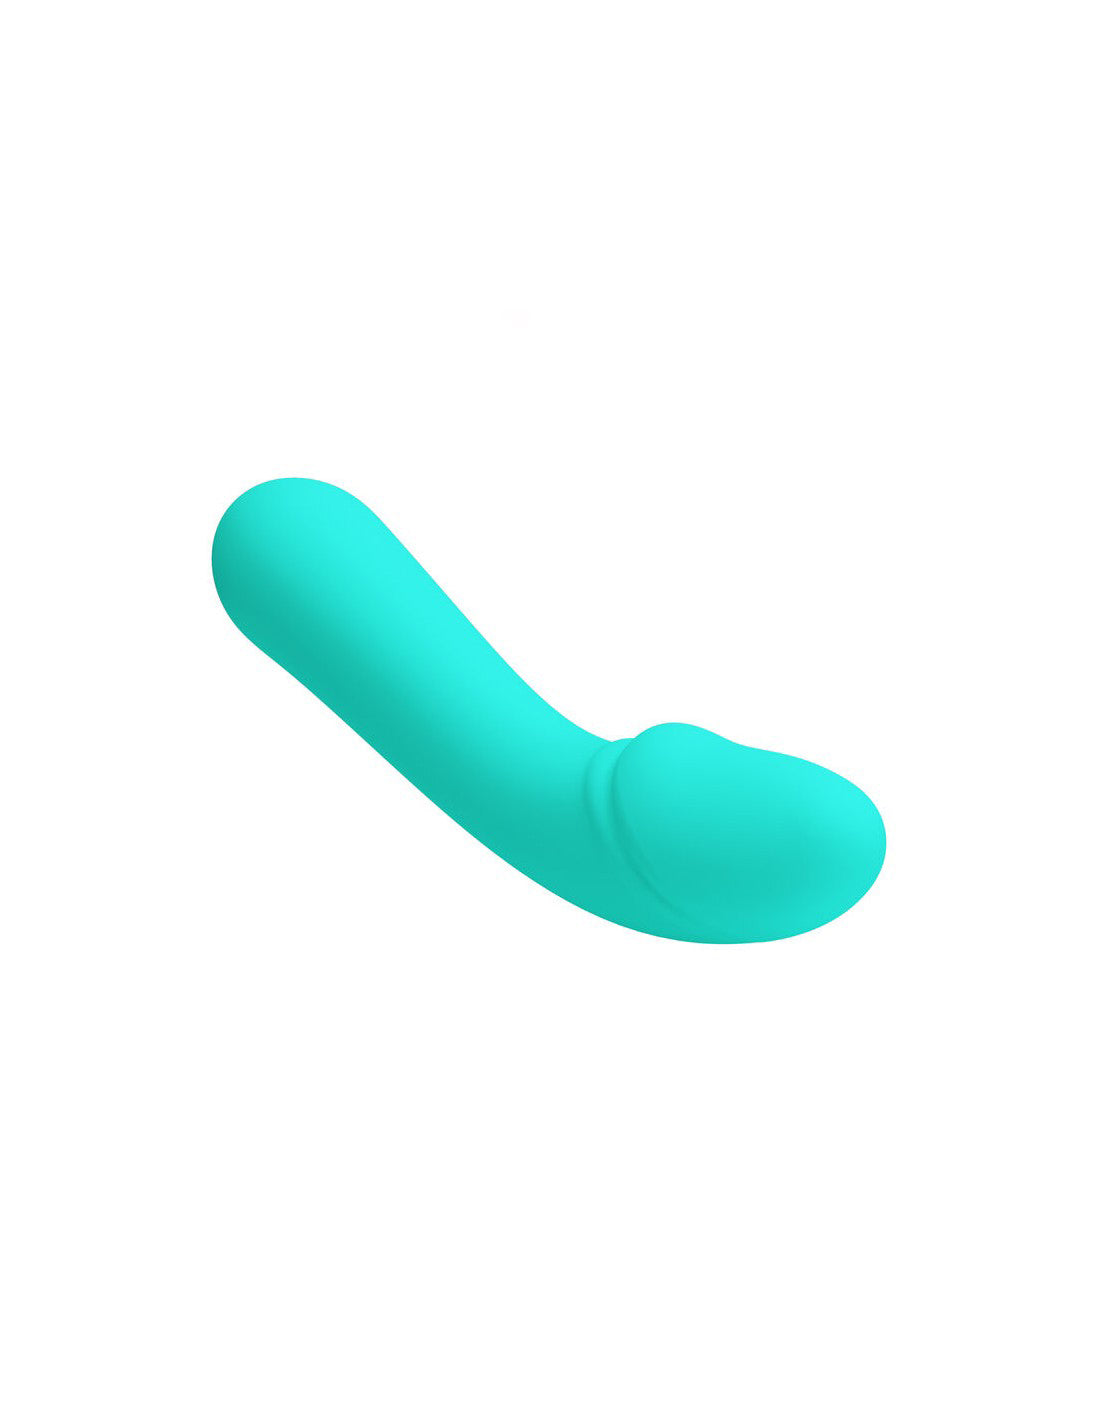 Cetus Rechargeable Vibrator - Turquoise-0